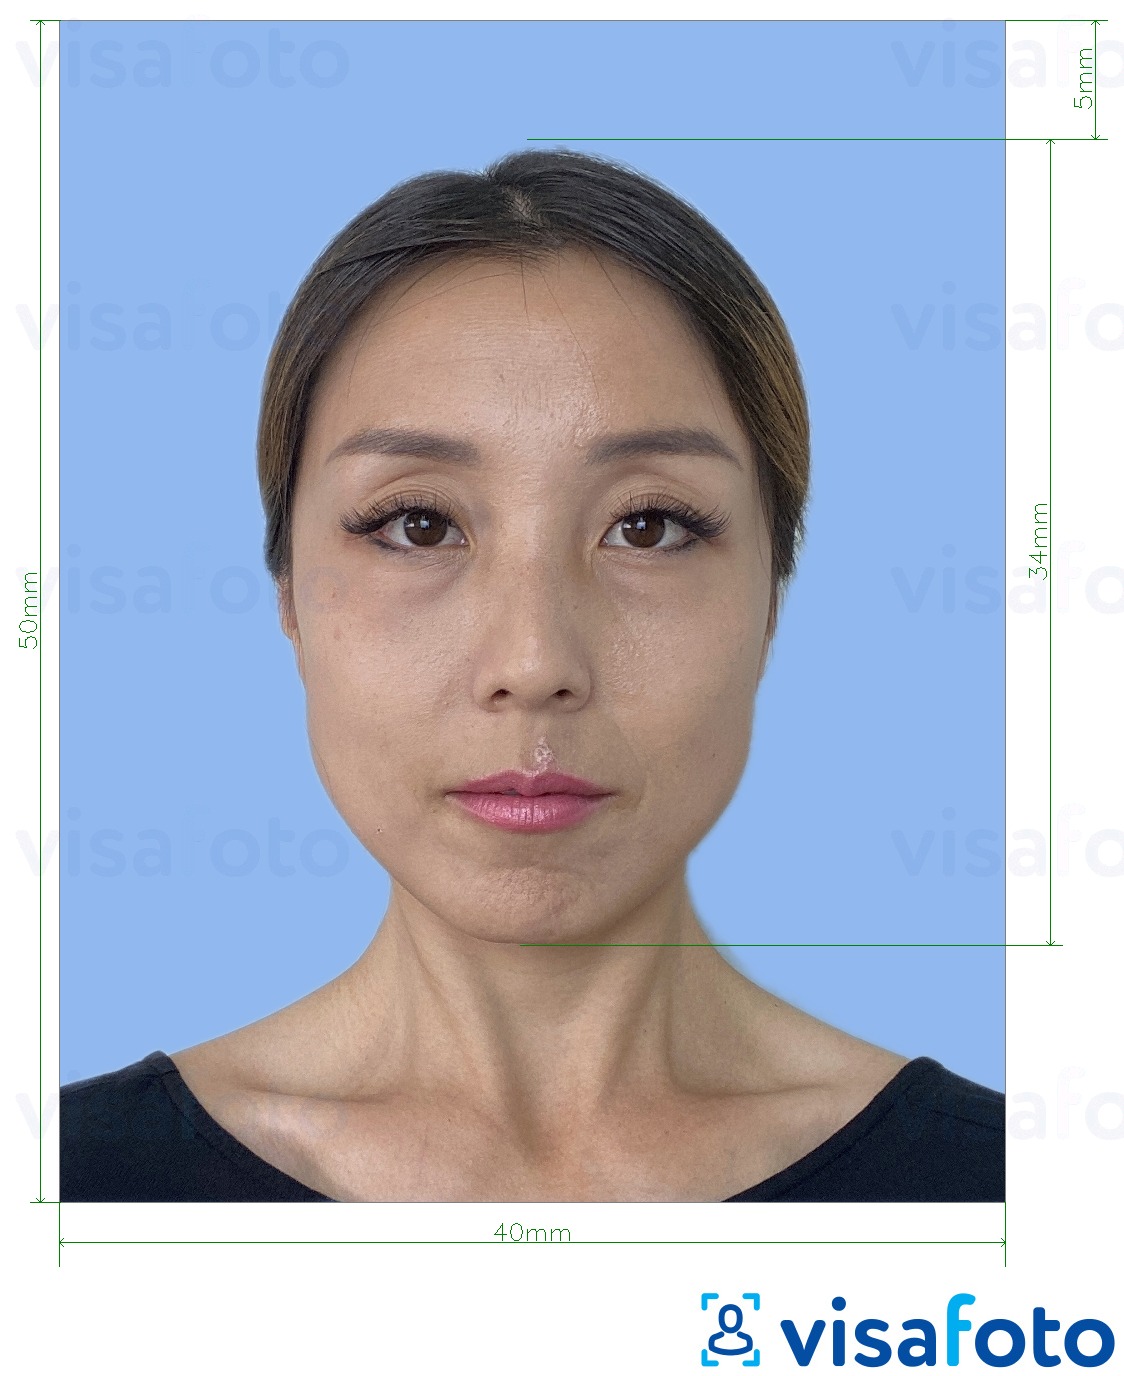 Example of photo for Japan foreign driver's license 4x5 cm with exact size specification